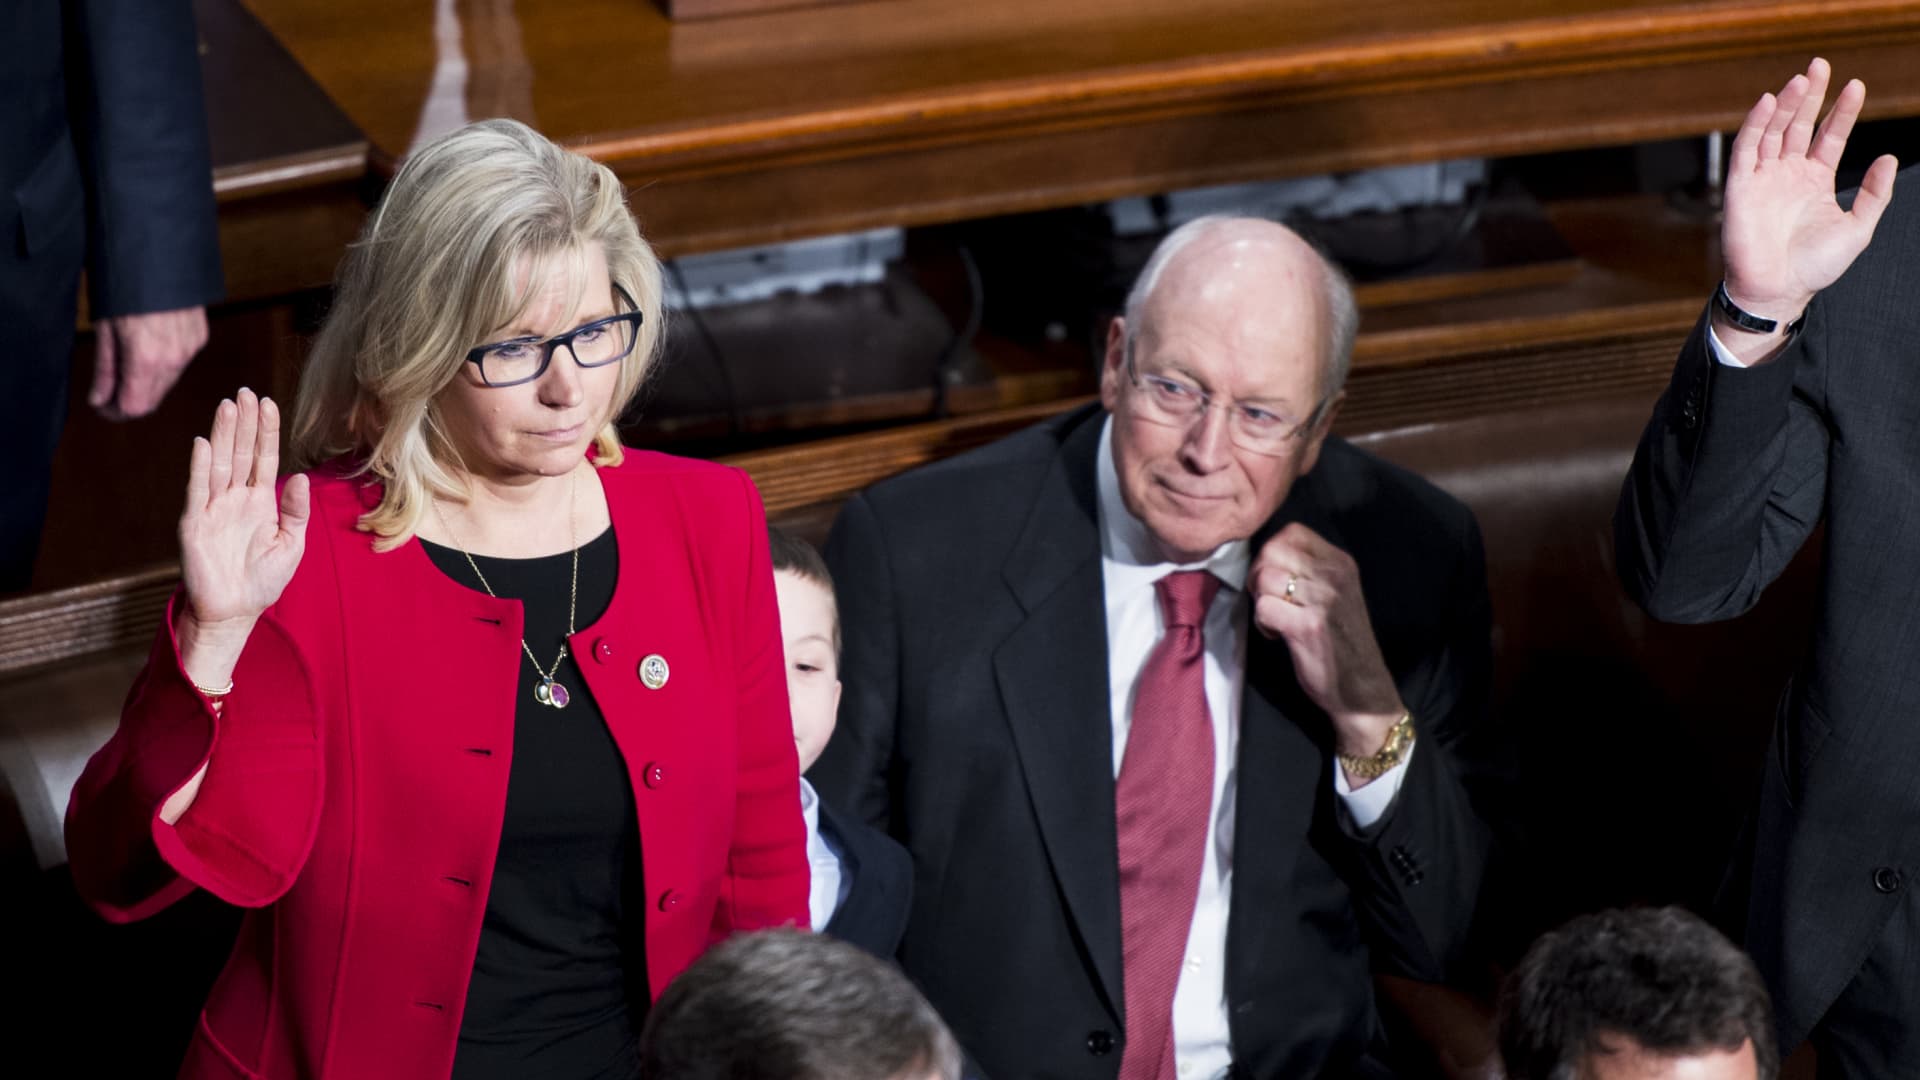 Former Vice President Dick Cheney looks on as his daughter Rep. Liz Cheney, R-Wyo., takes the oath of office on the House floor on Tuesday, Jan. 3, 2017.